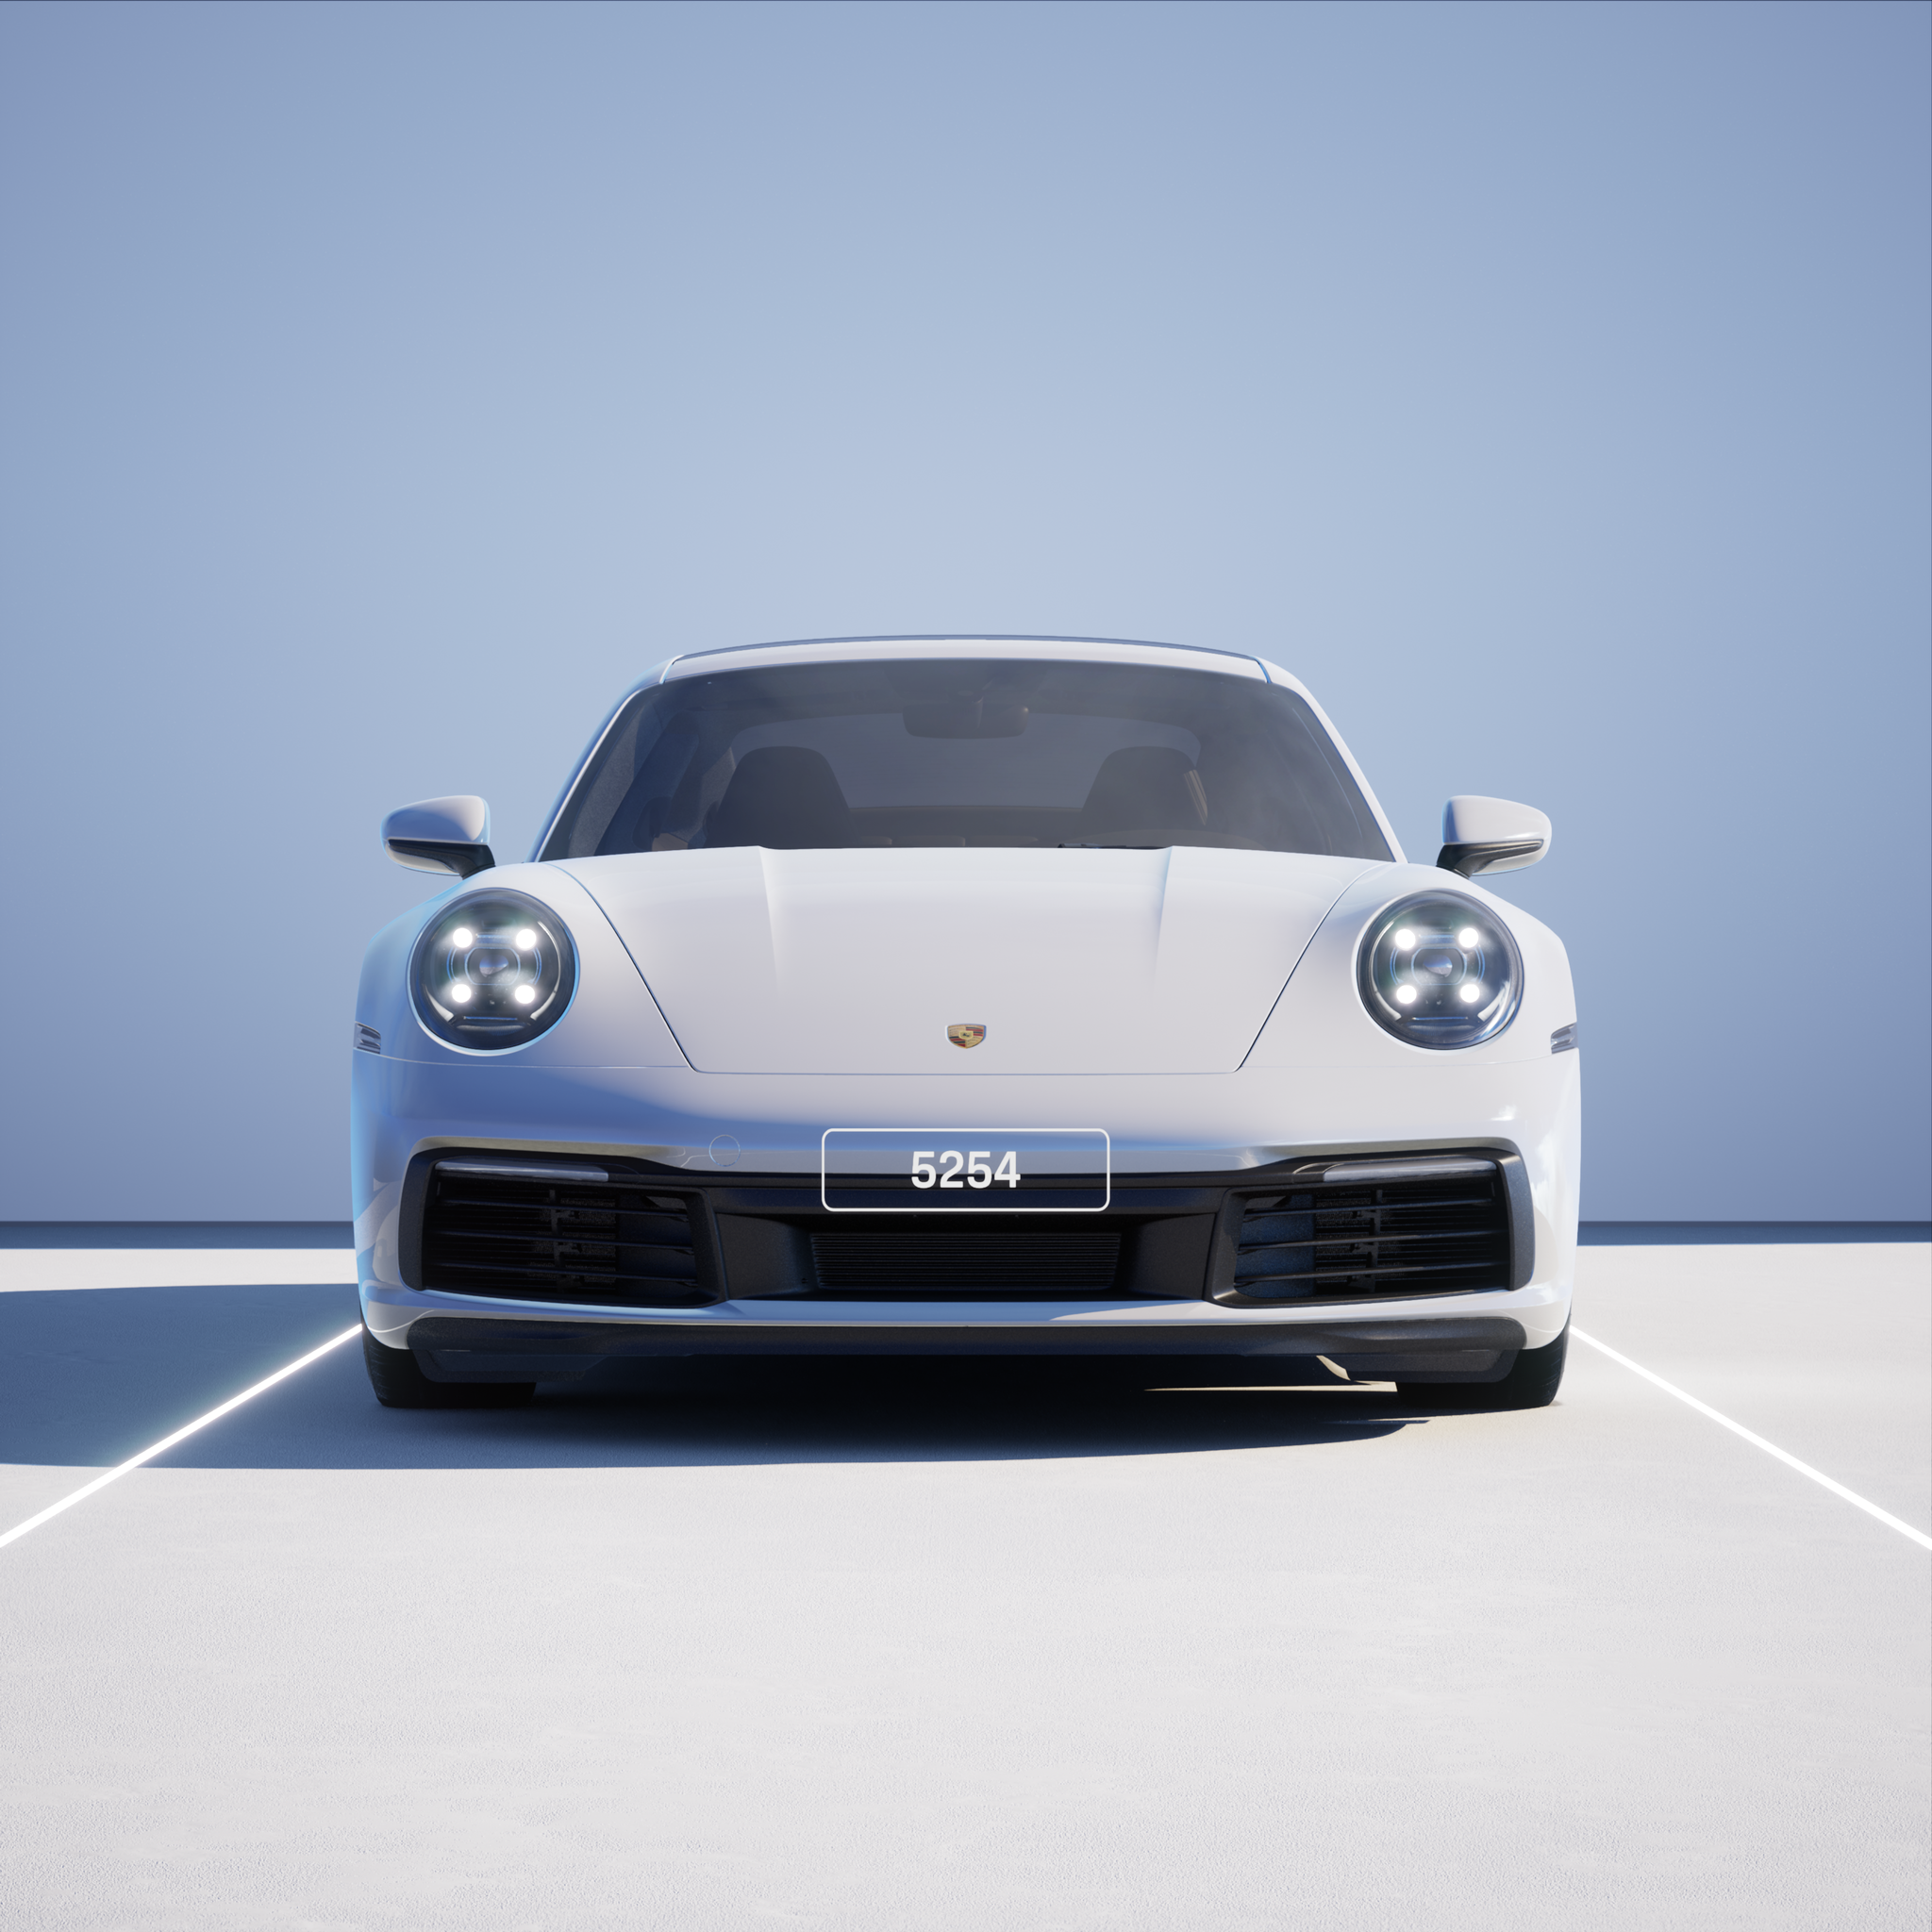 The PORSCHΞ 911 5254 image in phase